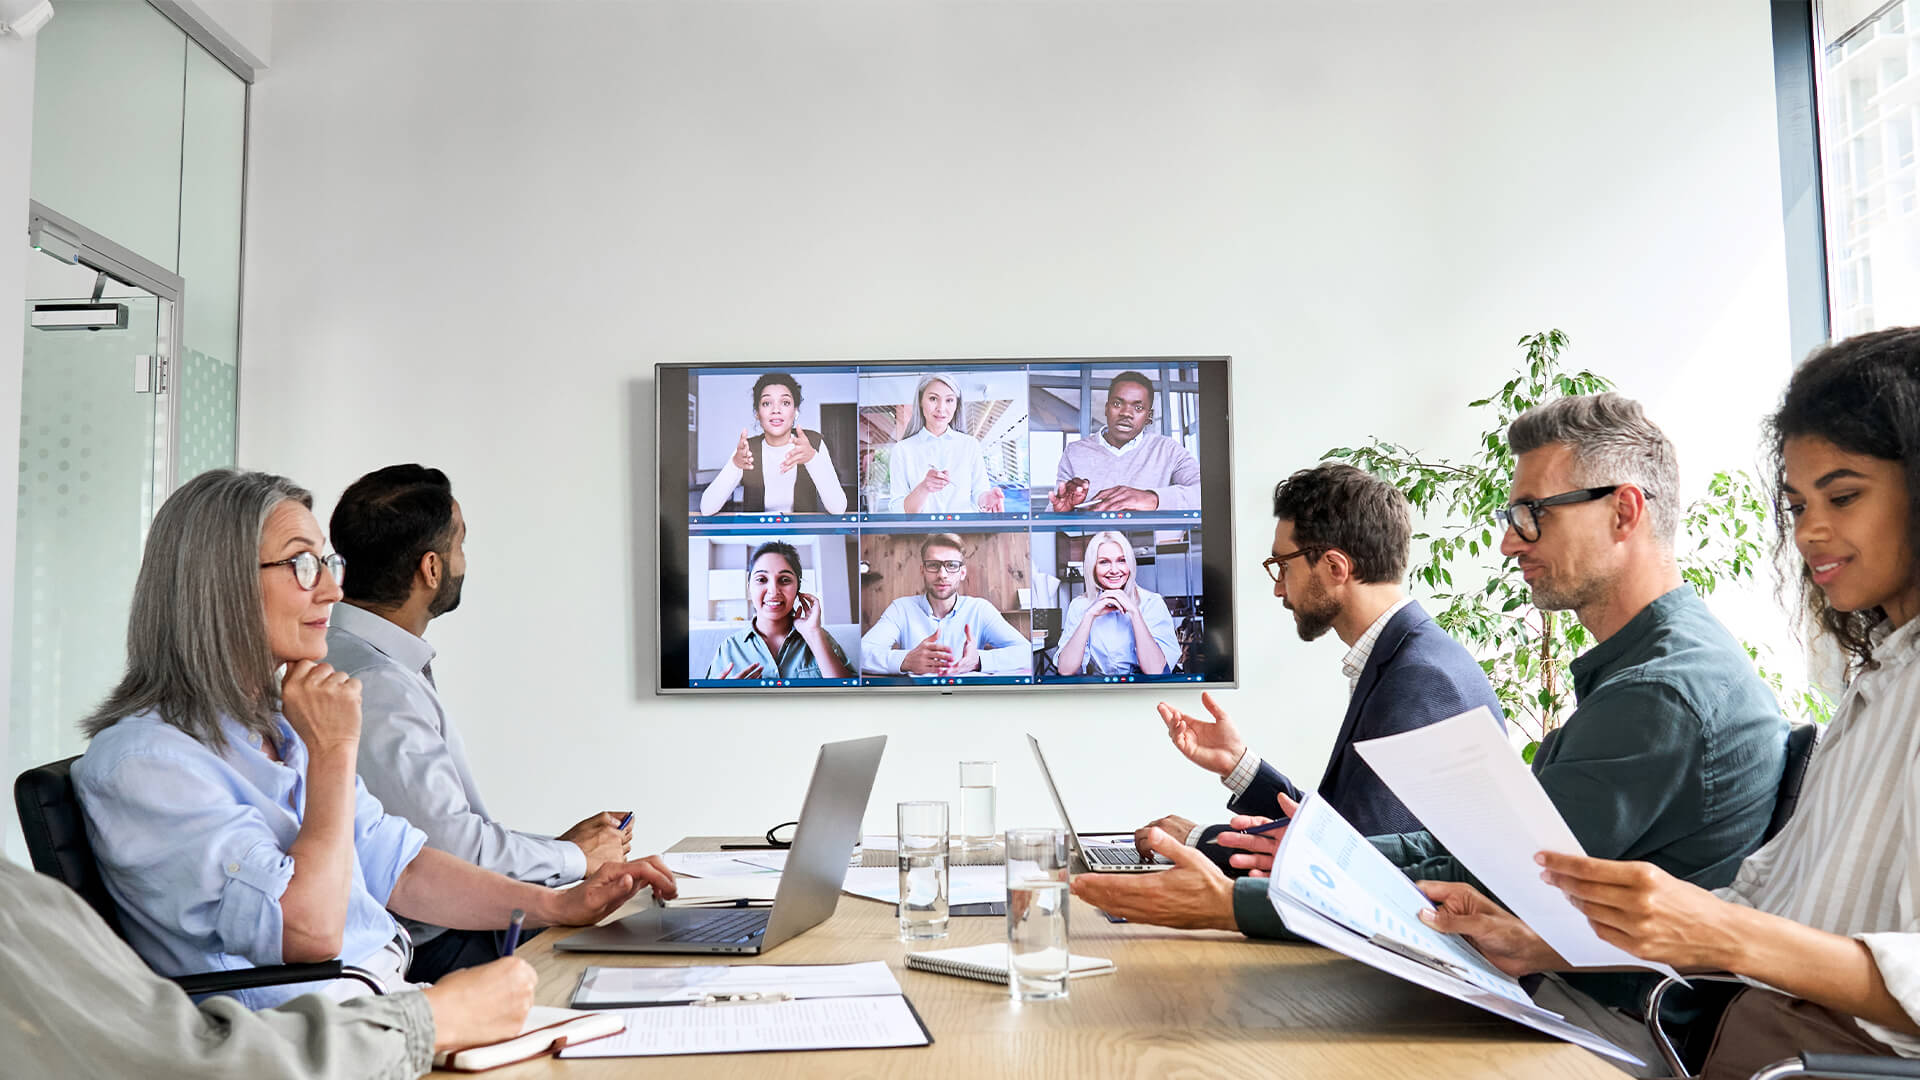 12 Virtual Meeting Best Practices Your Team Needs to Implement Now